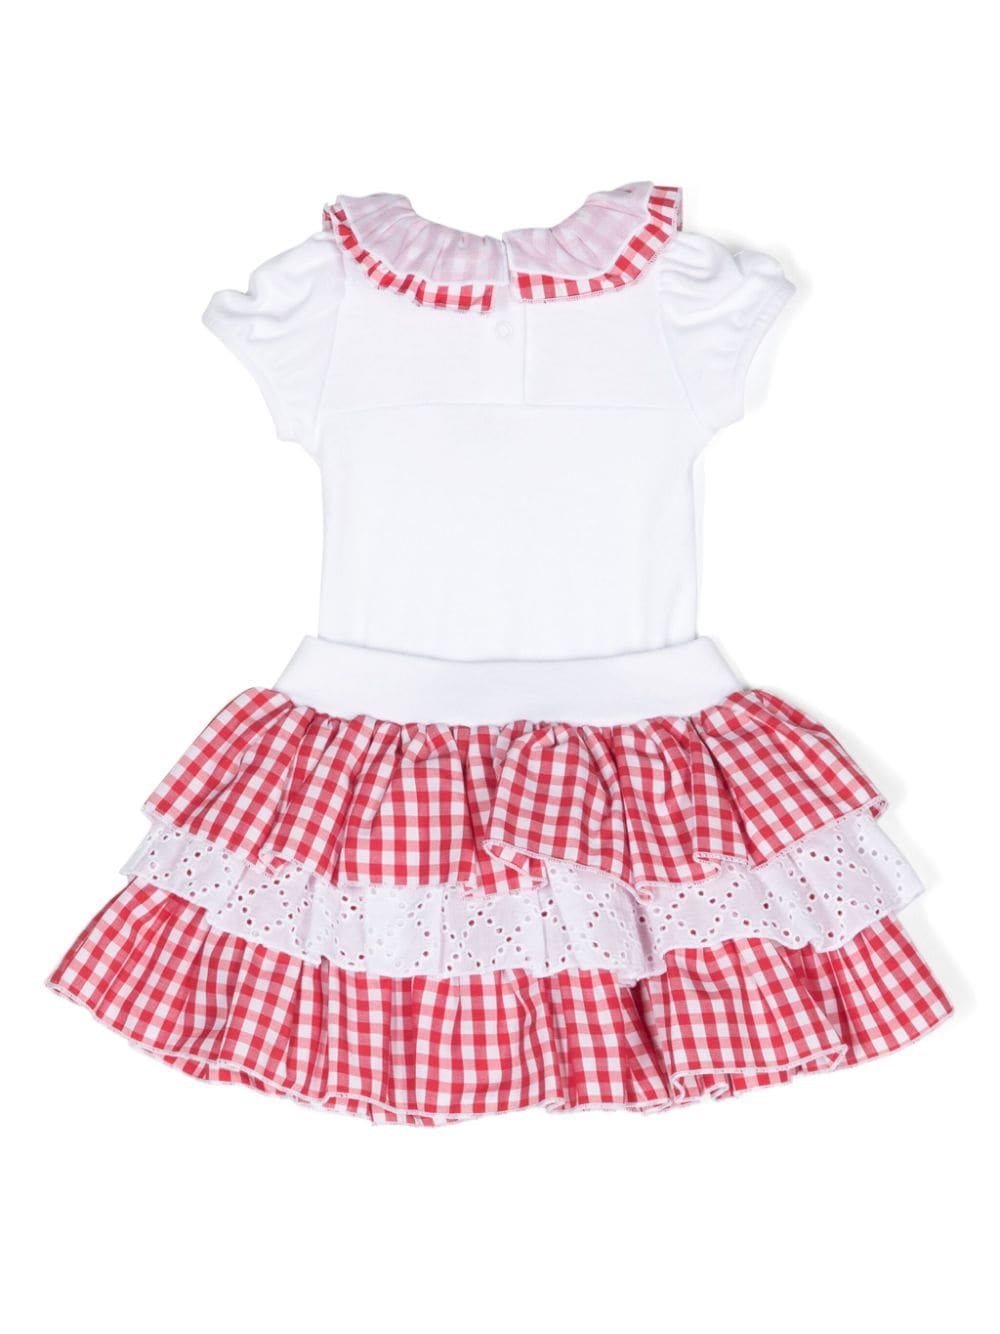 White and red bodysuit and skirt for baby girls